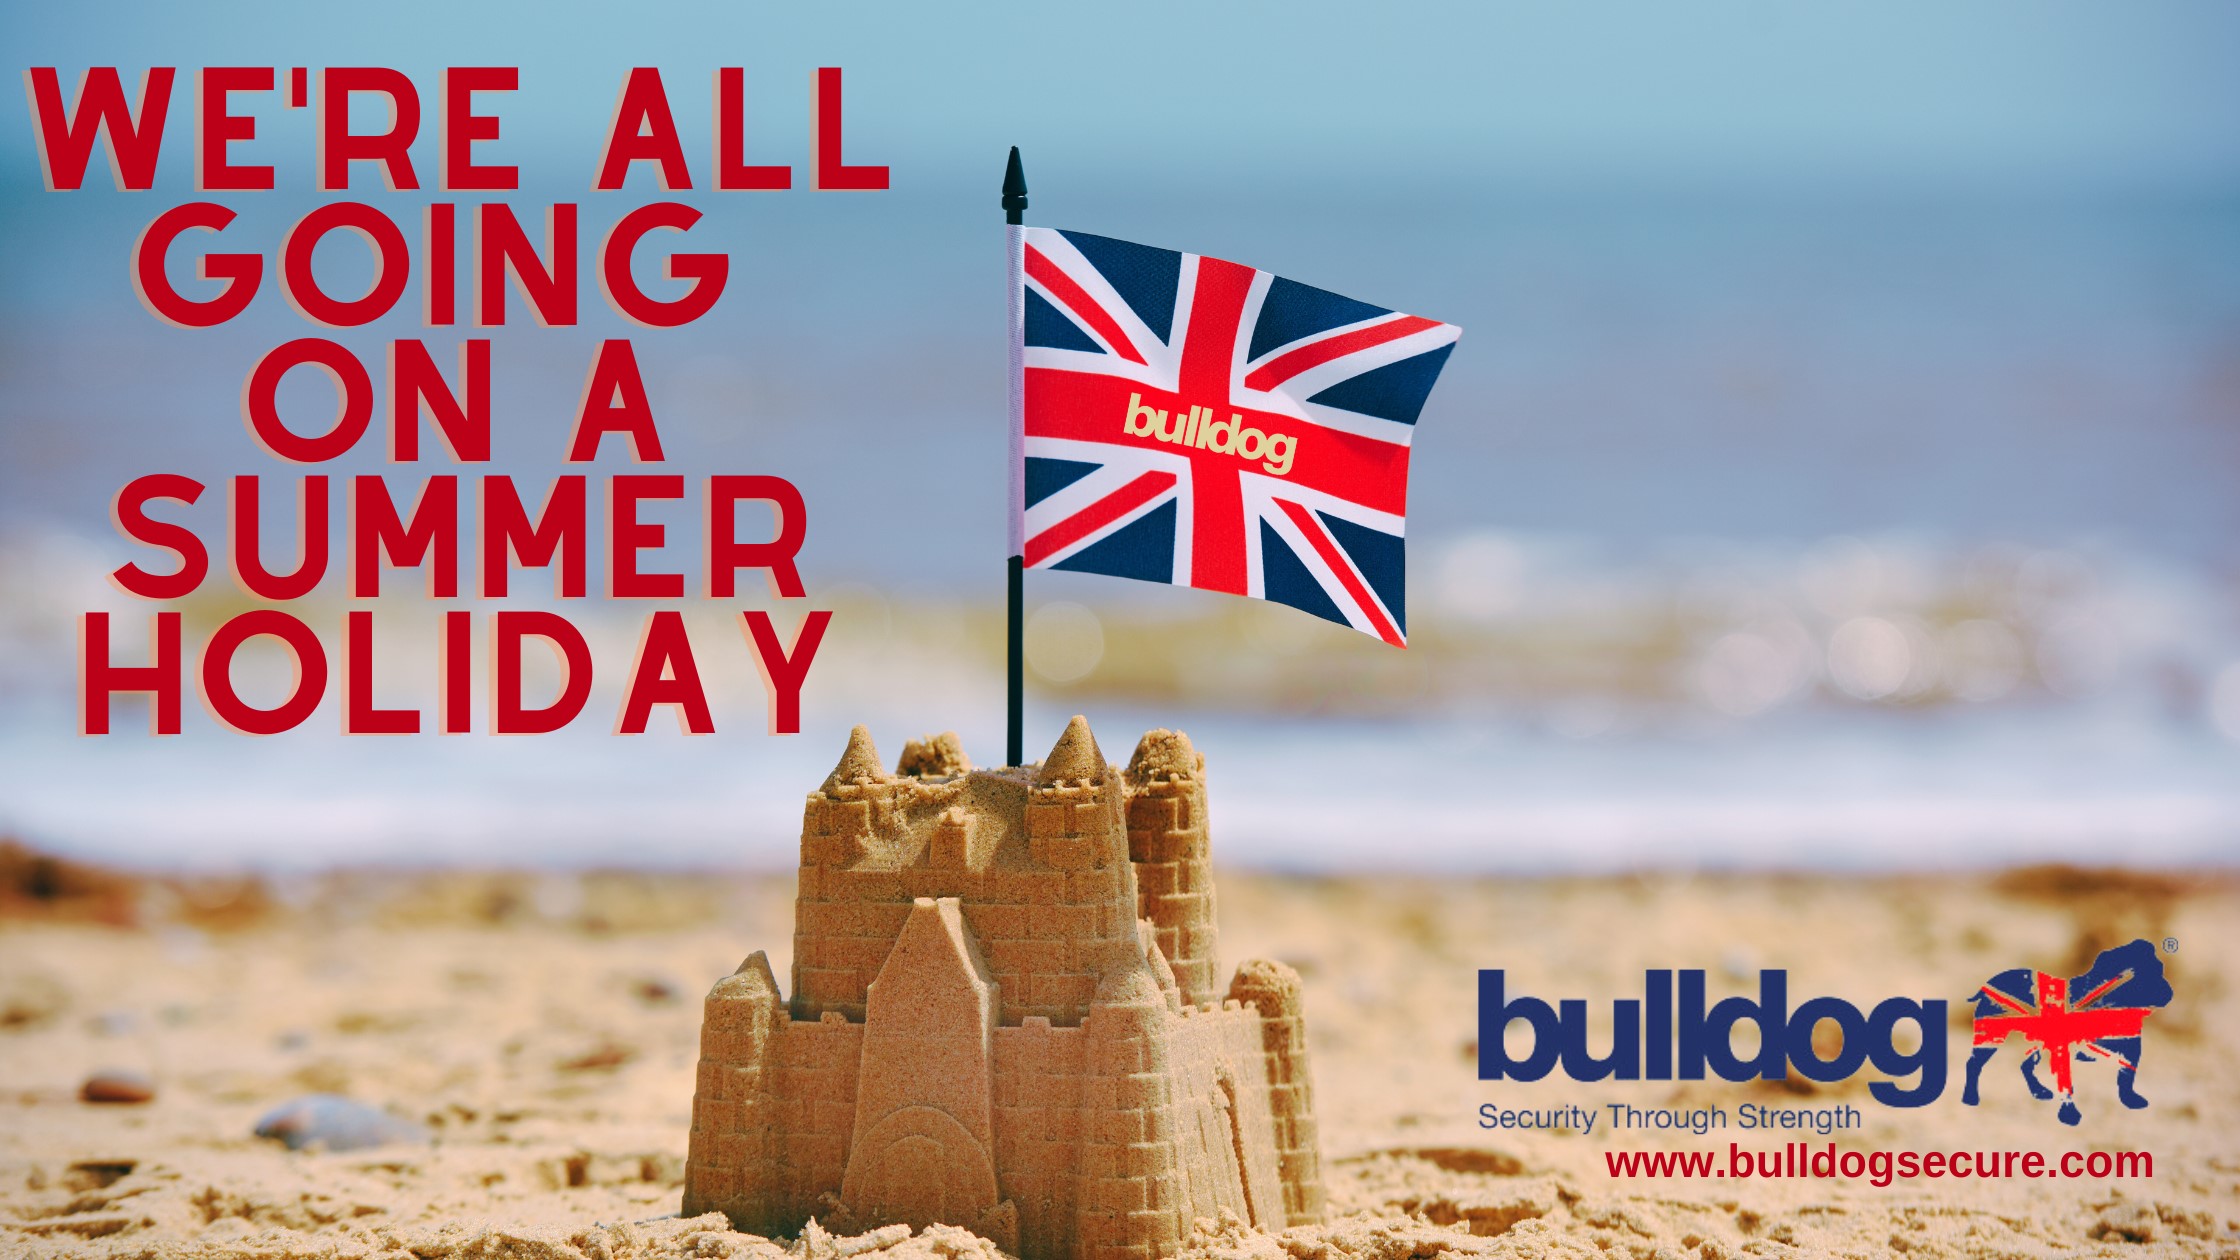 We're all going on a summer holiday (Blog Banner) (2).jpg